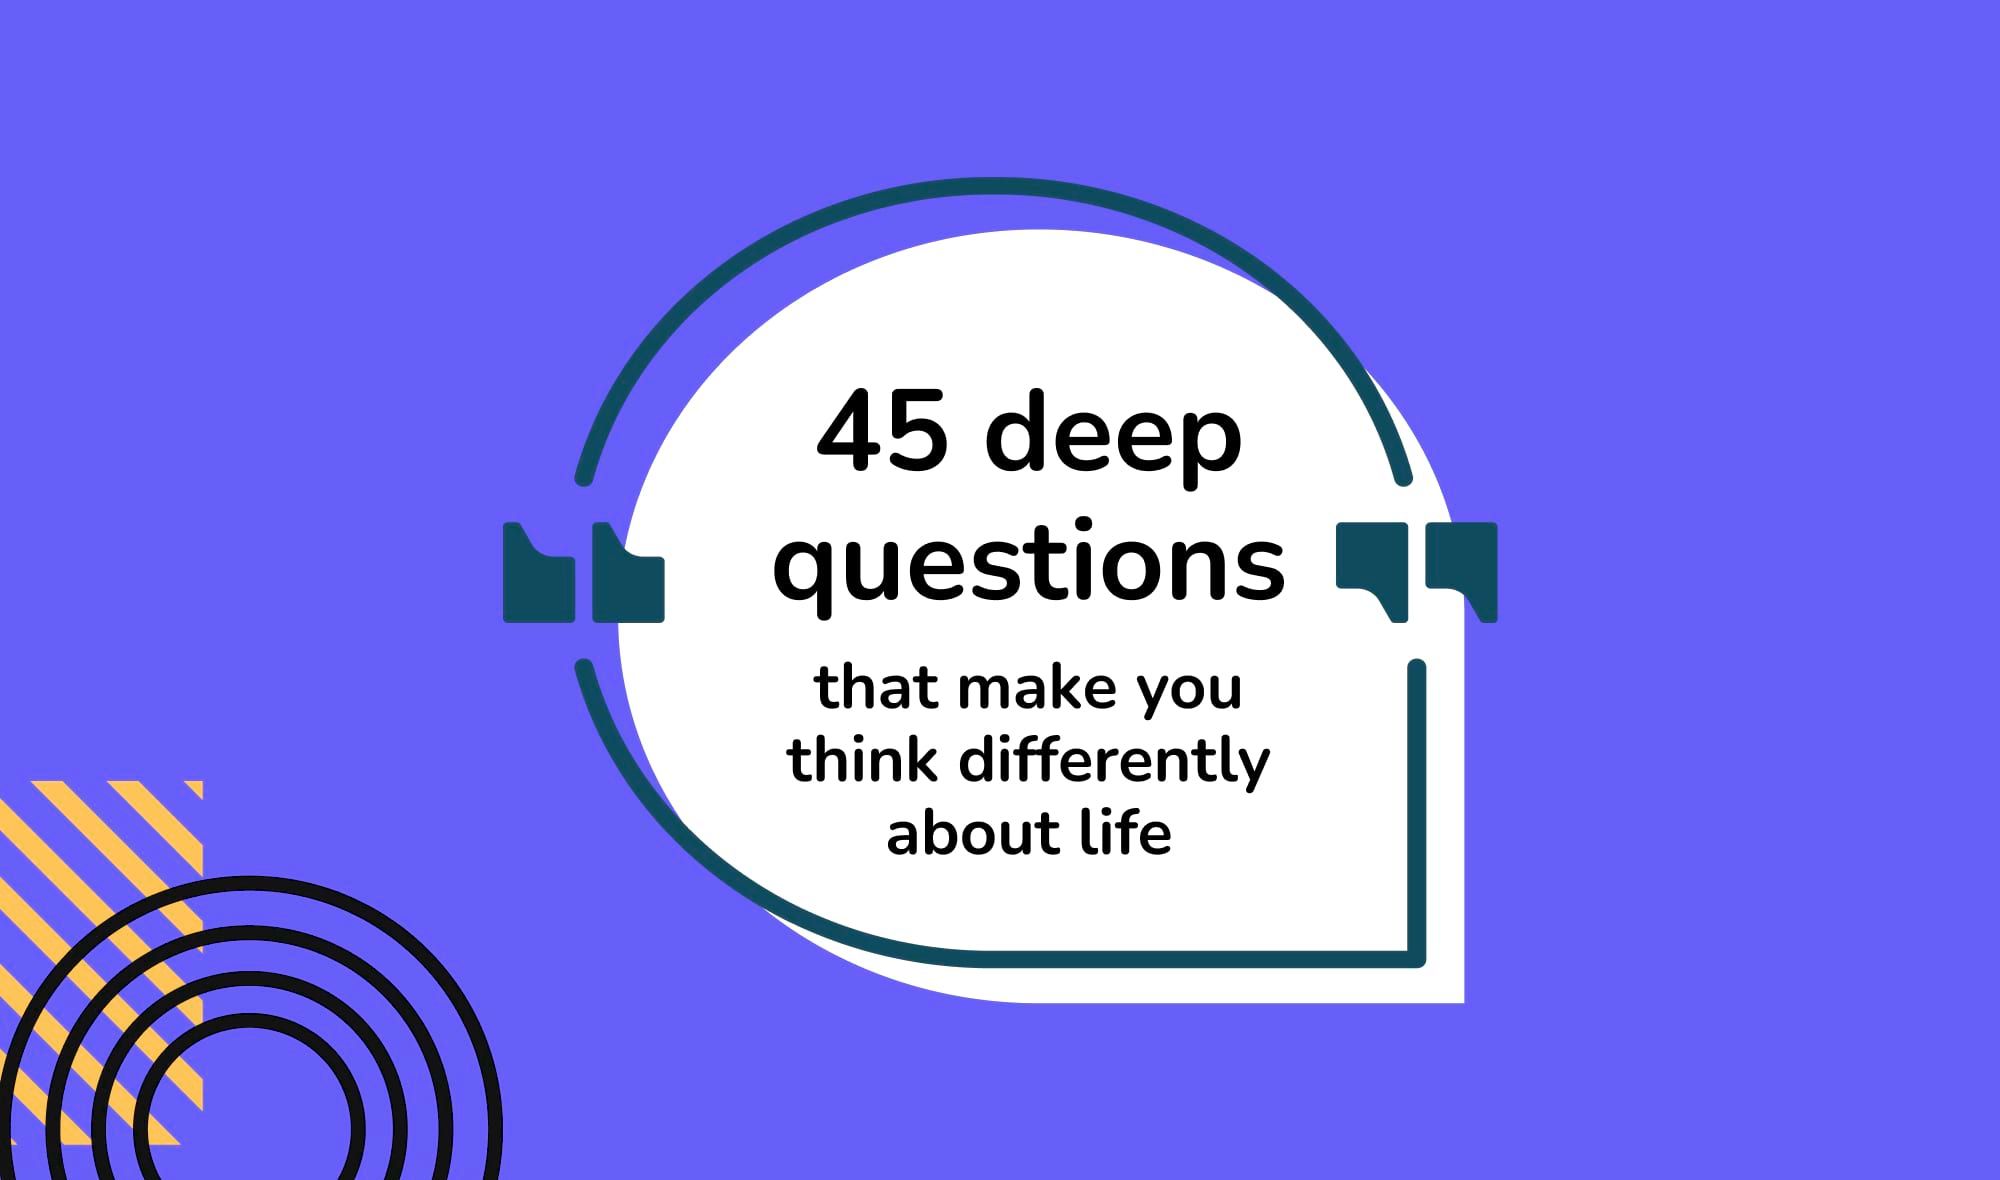 45 deep questions that make you think differently about life